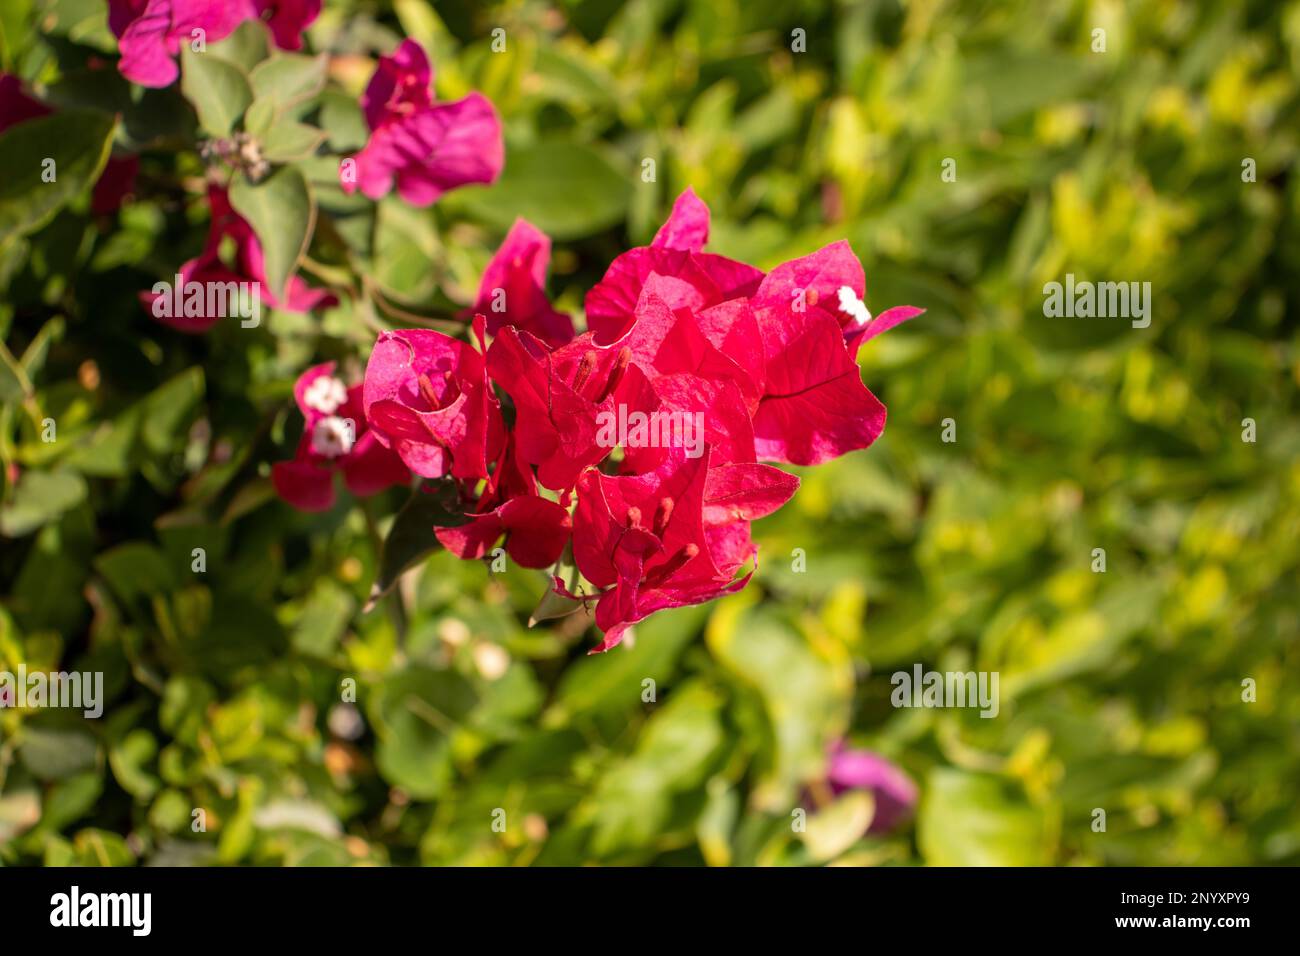 bright pink Bougainvillea flowers with green leaves in the background Stock Photo